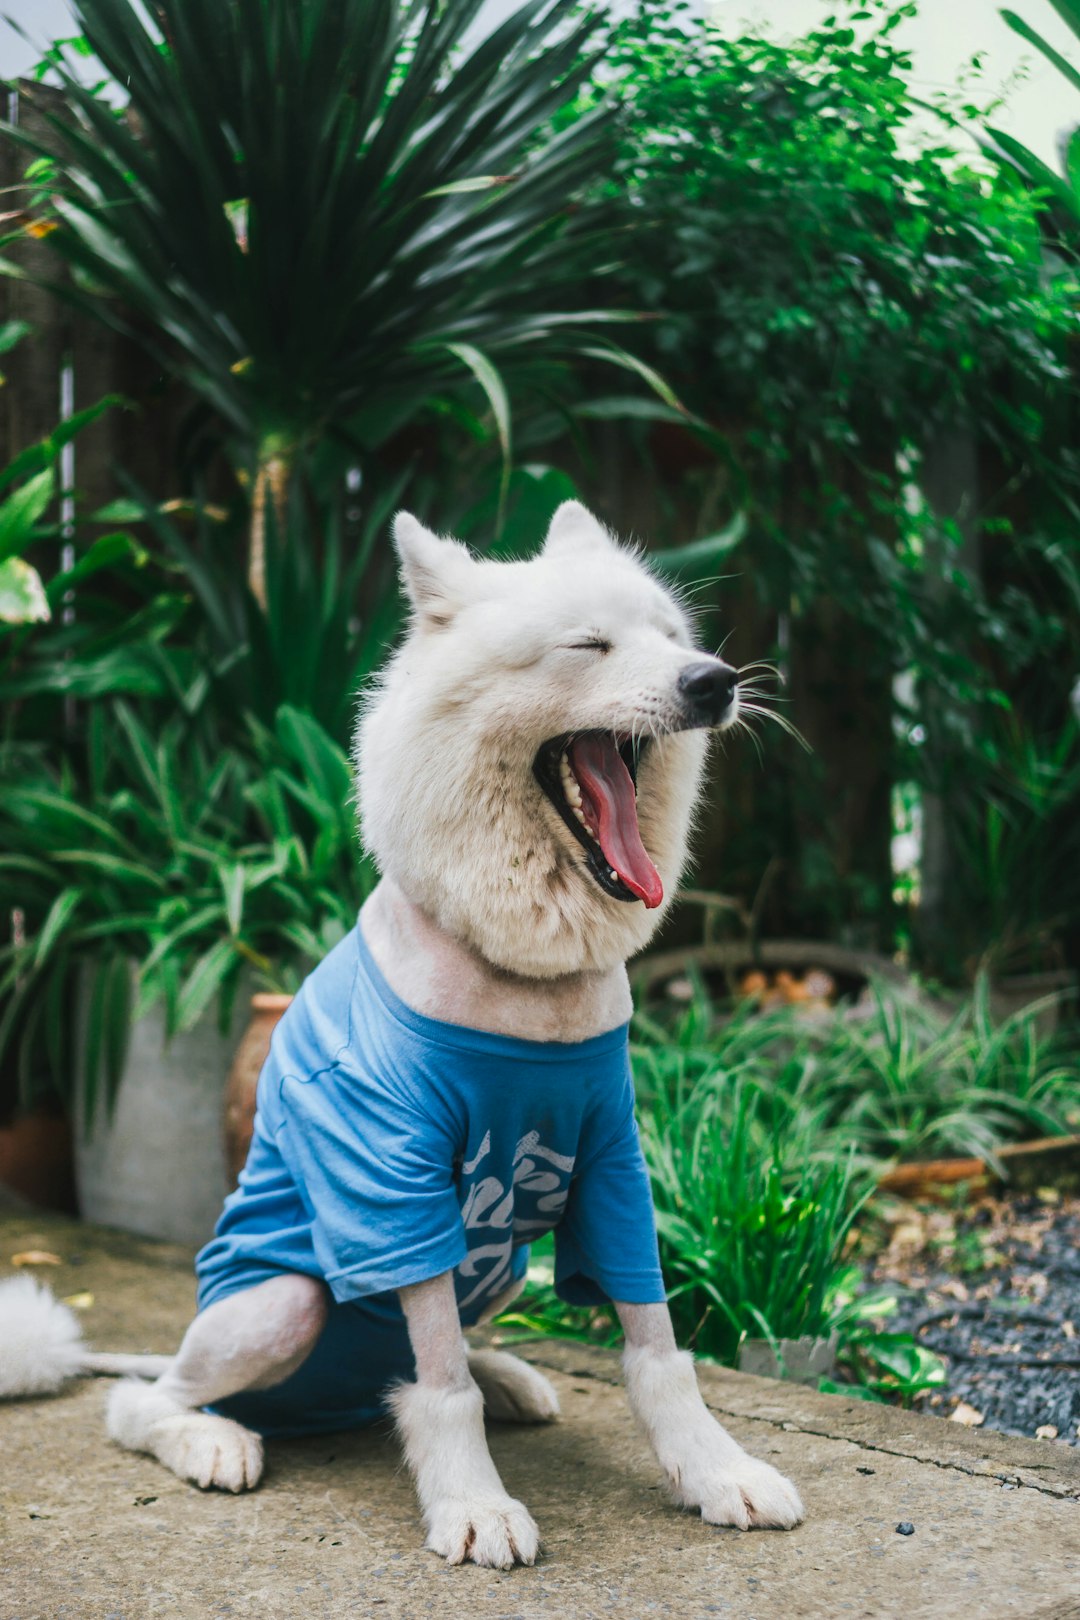 a white dog wearing a blue shirt sitting on the ground